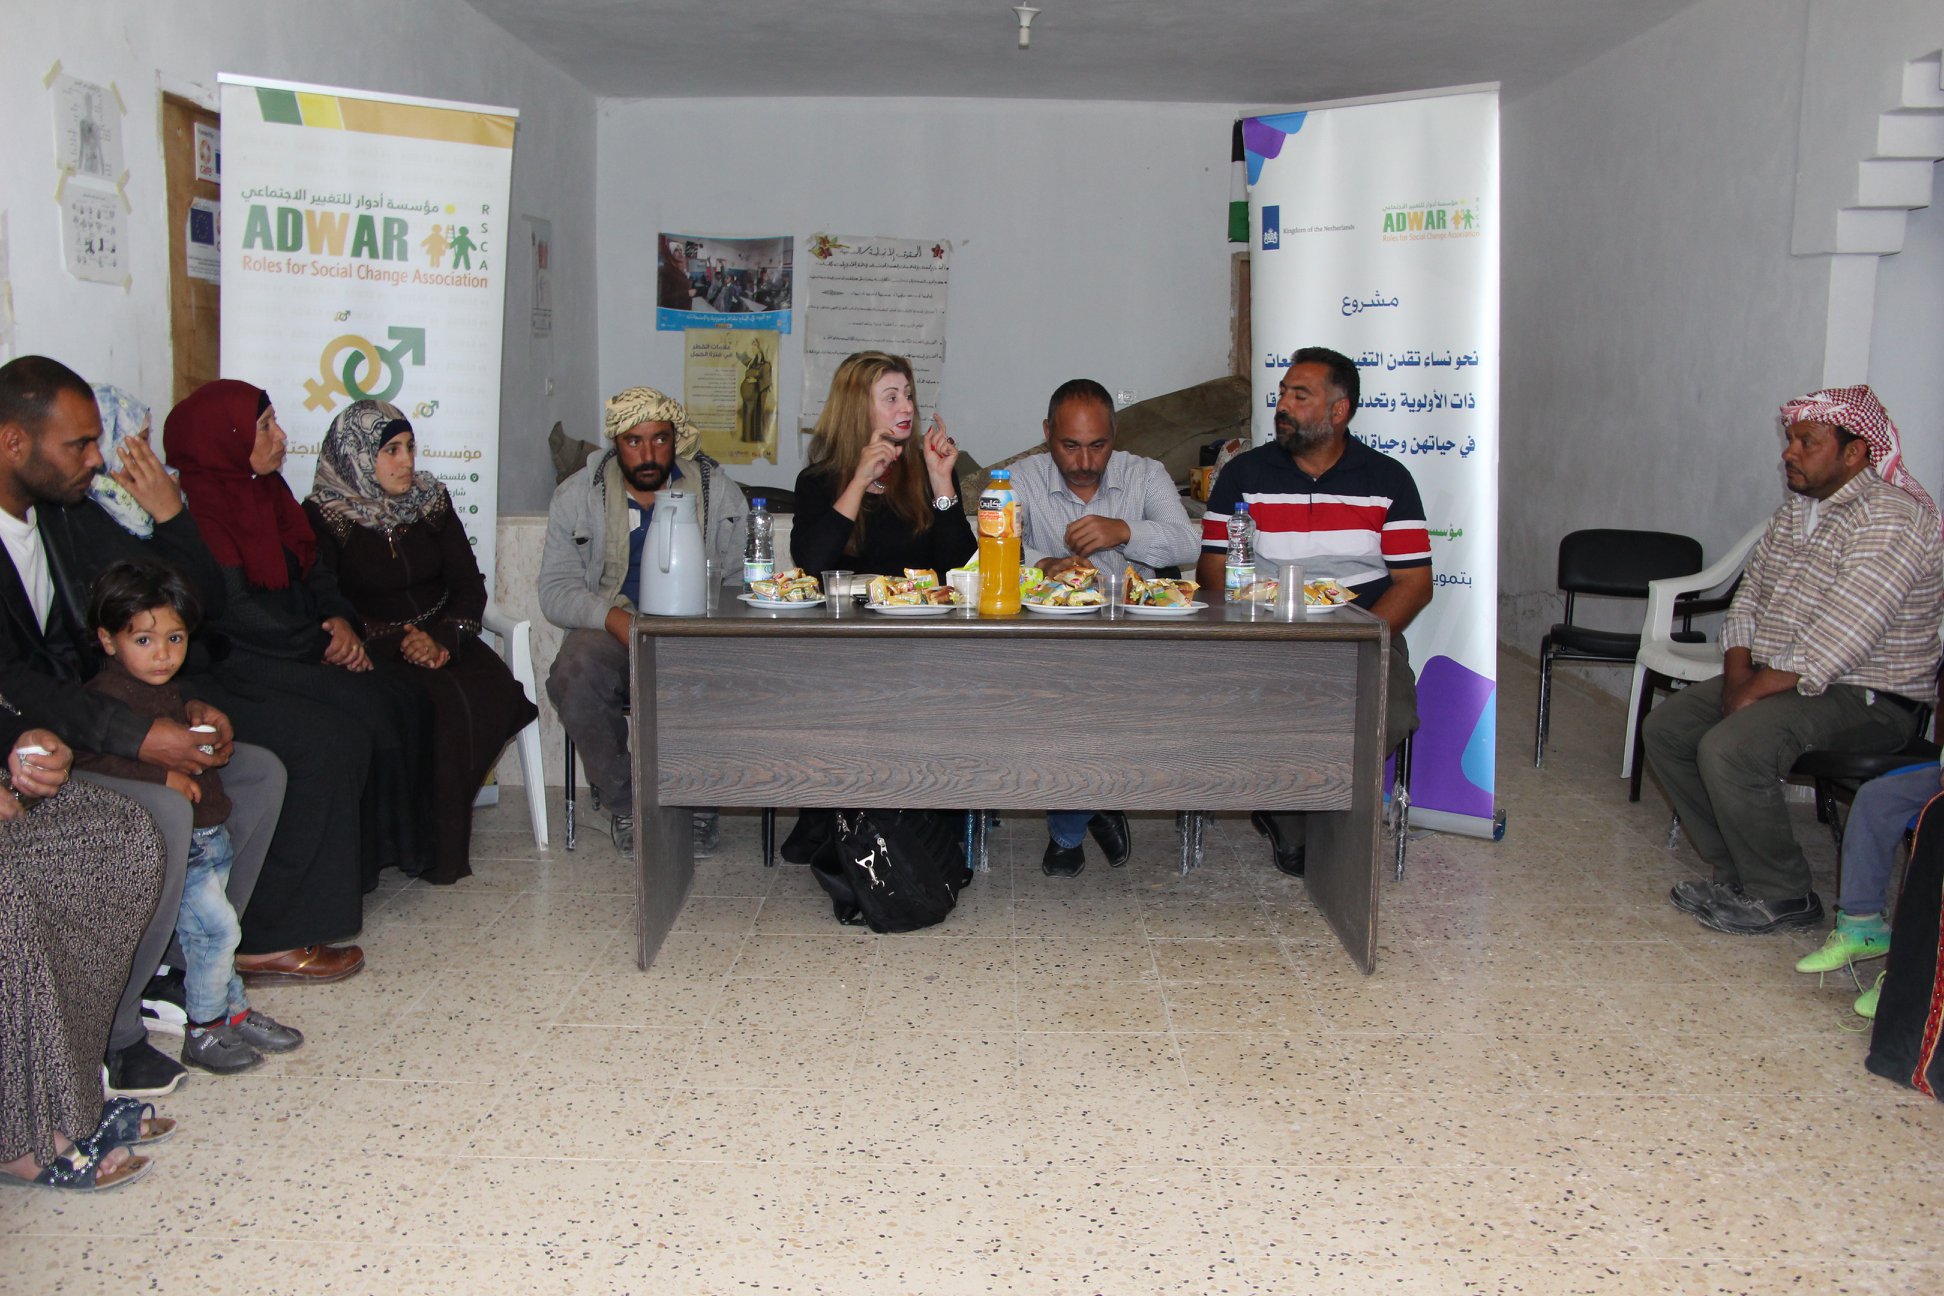  Roles for Social Change Association-ADWAR continues holding dialogues with influential men in local community as a part of the project “Towards Women Who Make Change in Priority Communities